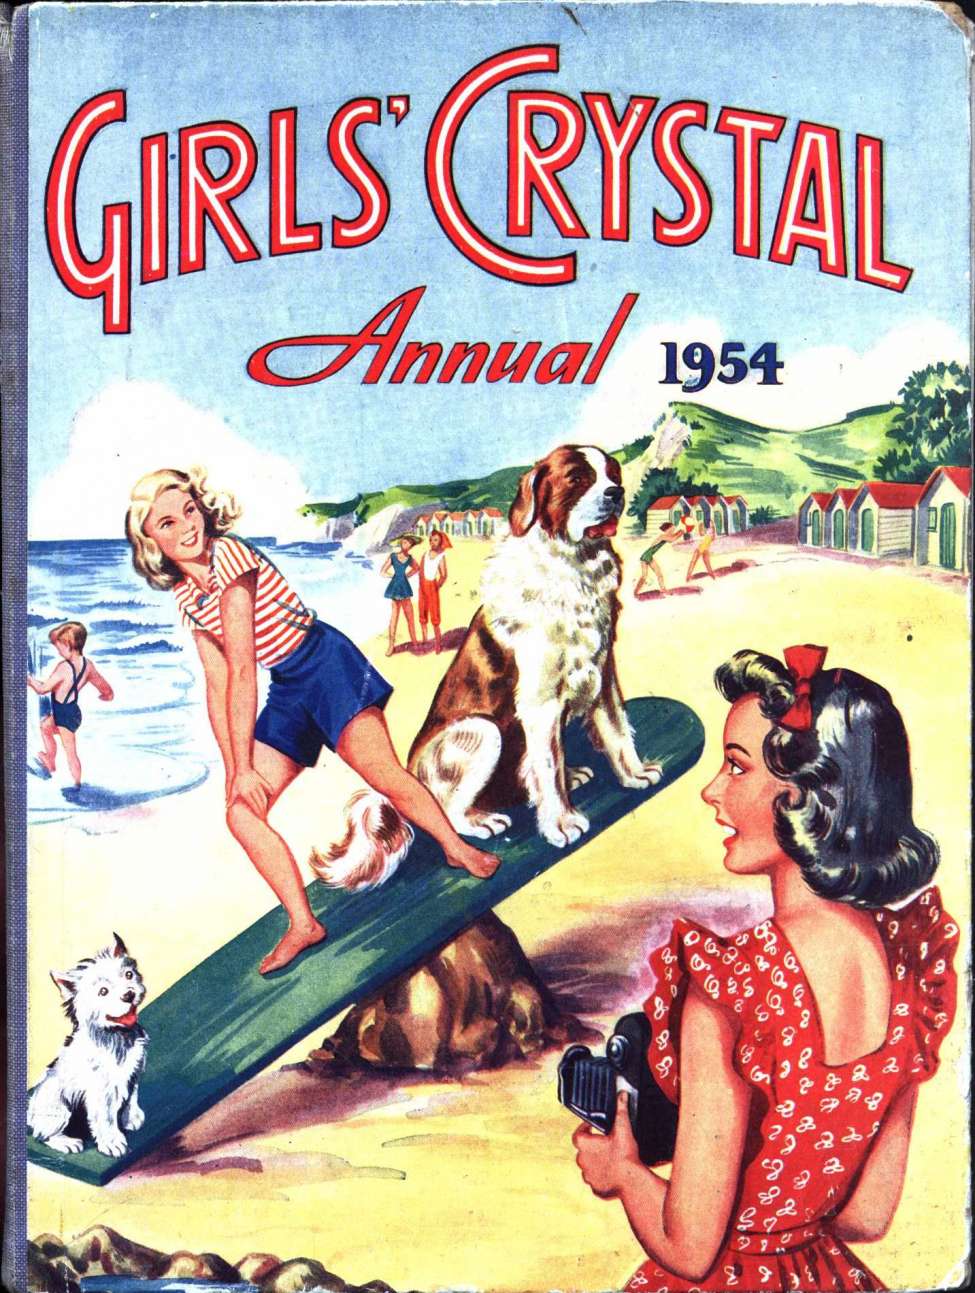 Book Cover For Girls' Crystal Annual 1954